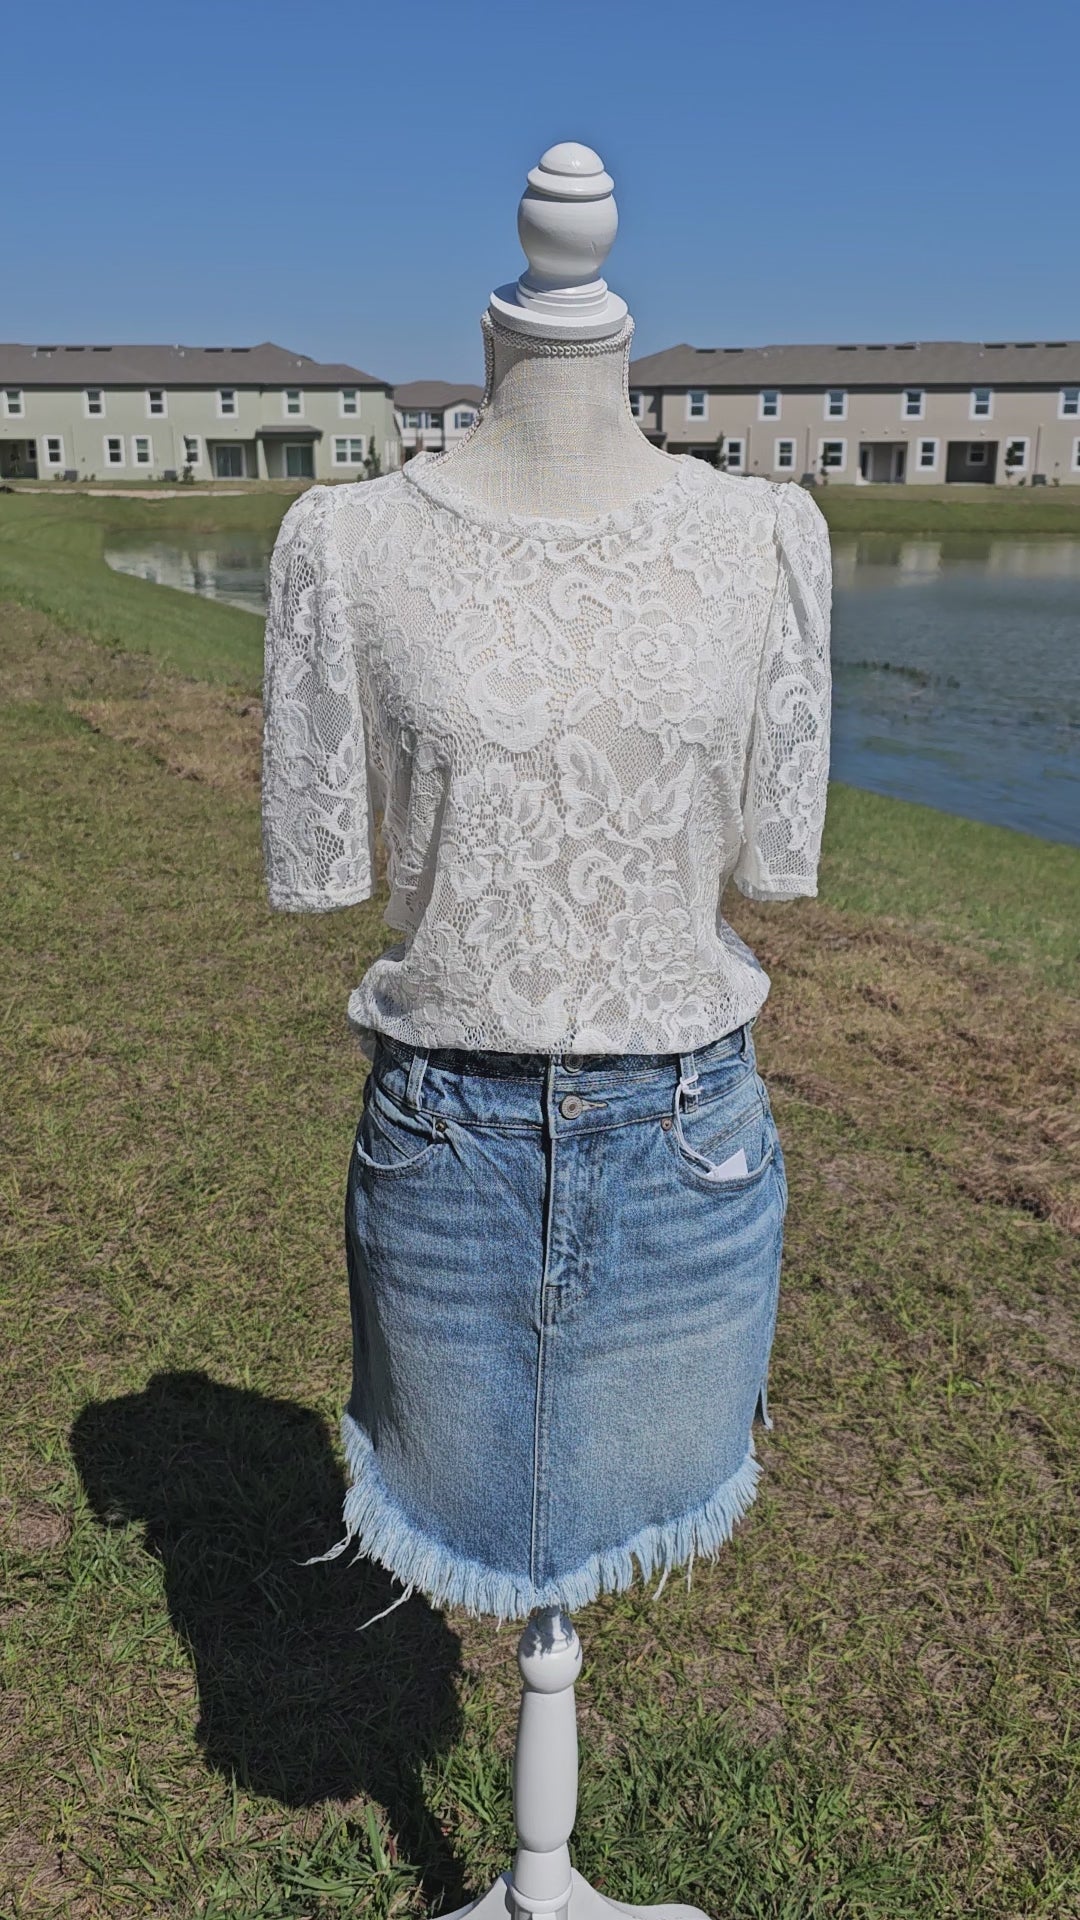 “All About The Lace” is a gorgeous white lace top. This is a short sleeve shirt, featuring floral lace print, bubble sleeves, rounded neckline and hemline. It does have stretch! Pair with your favorite cami or bralette. Sizes small through large.